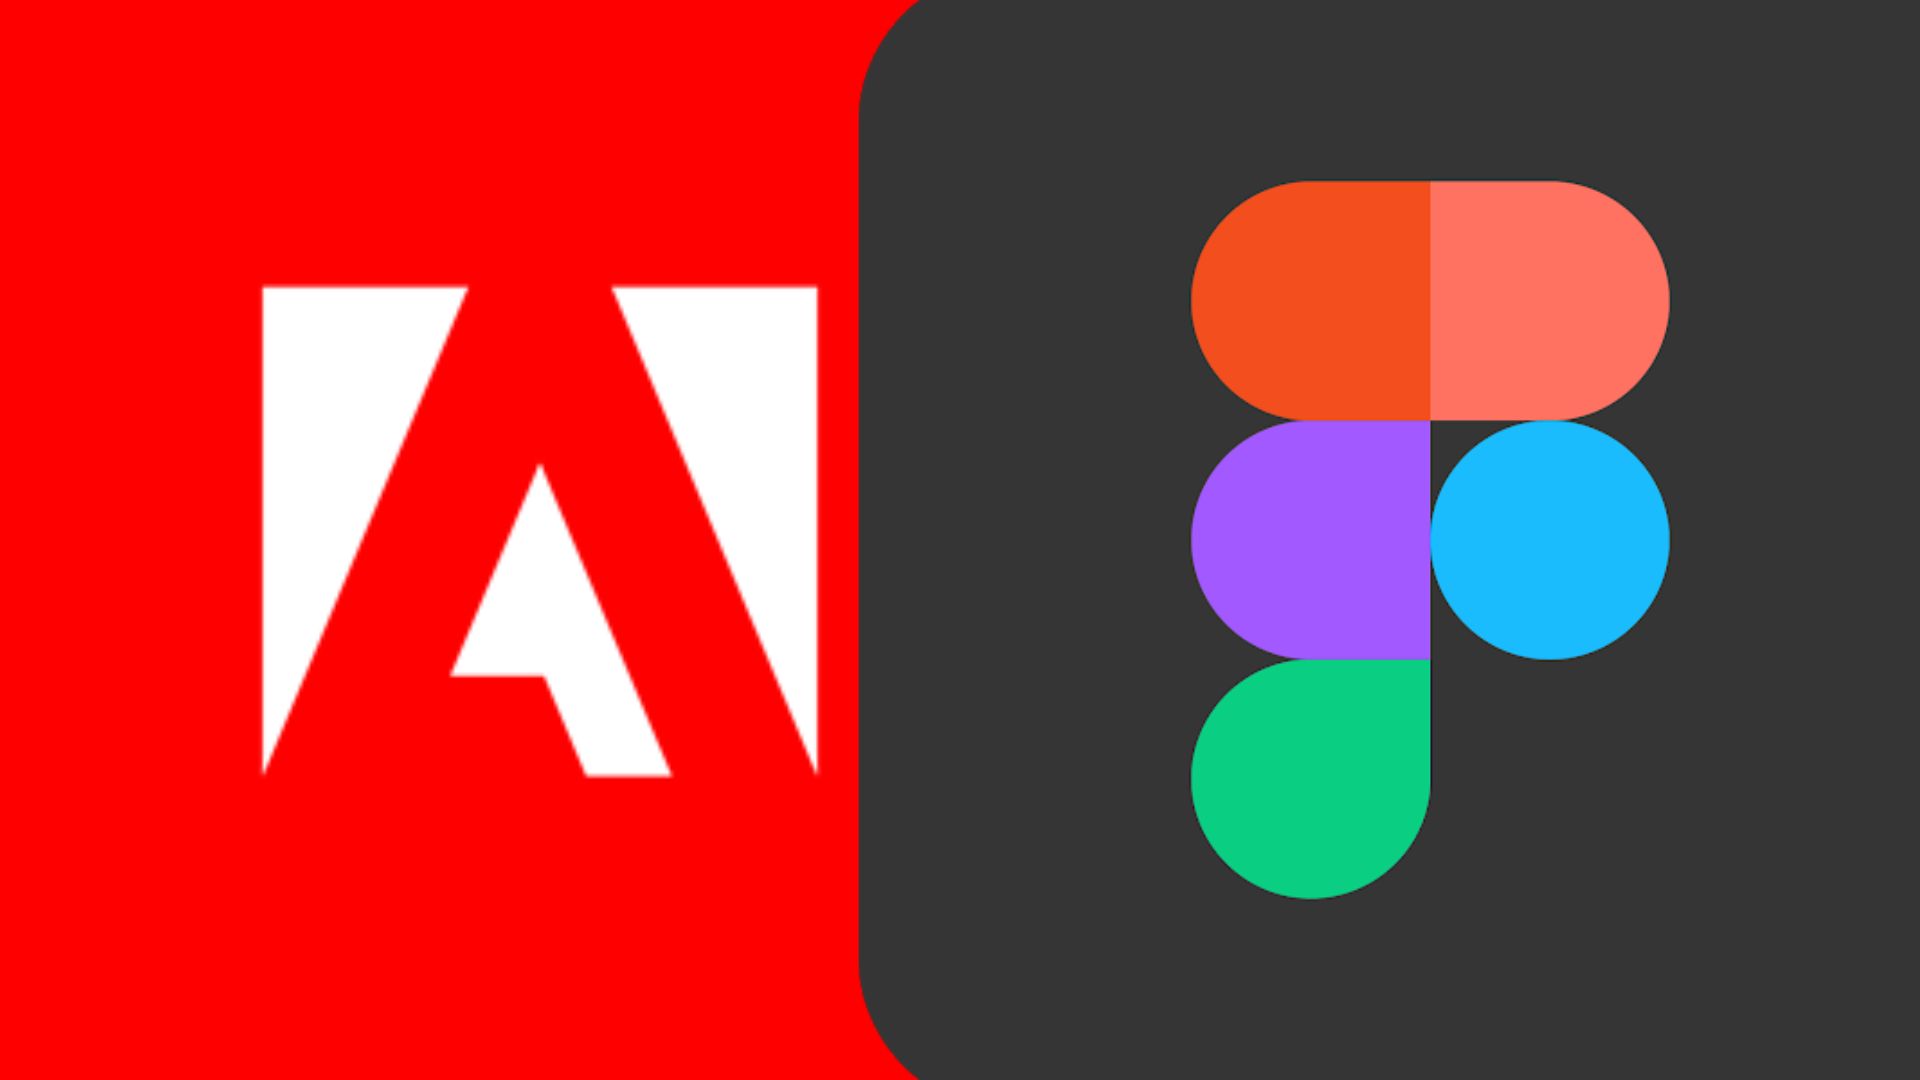 Photoshop maker Adobe has agreed to pay 20 billion to acquire design software Figma